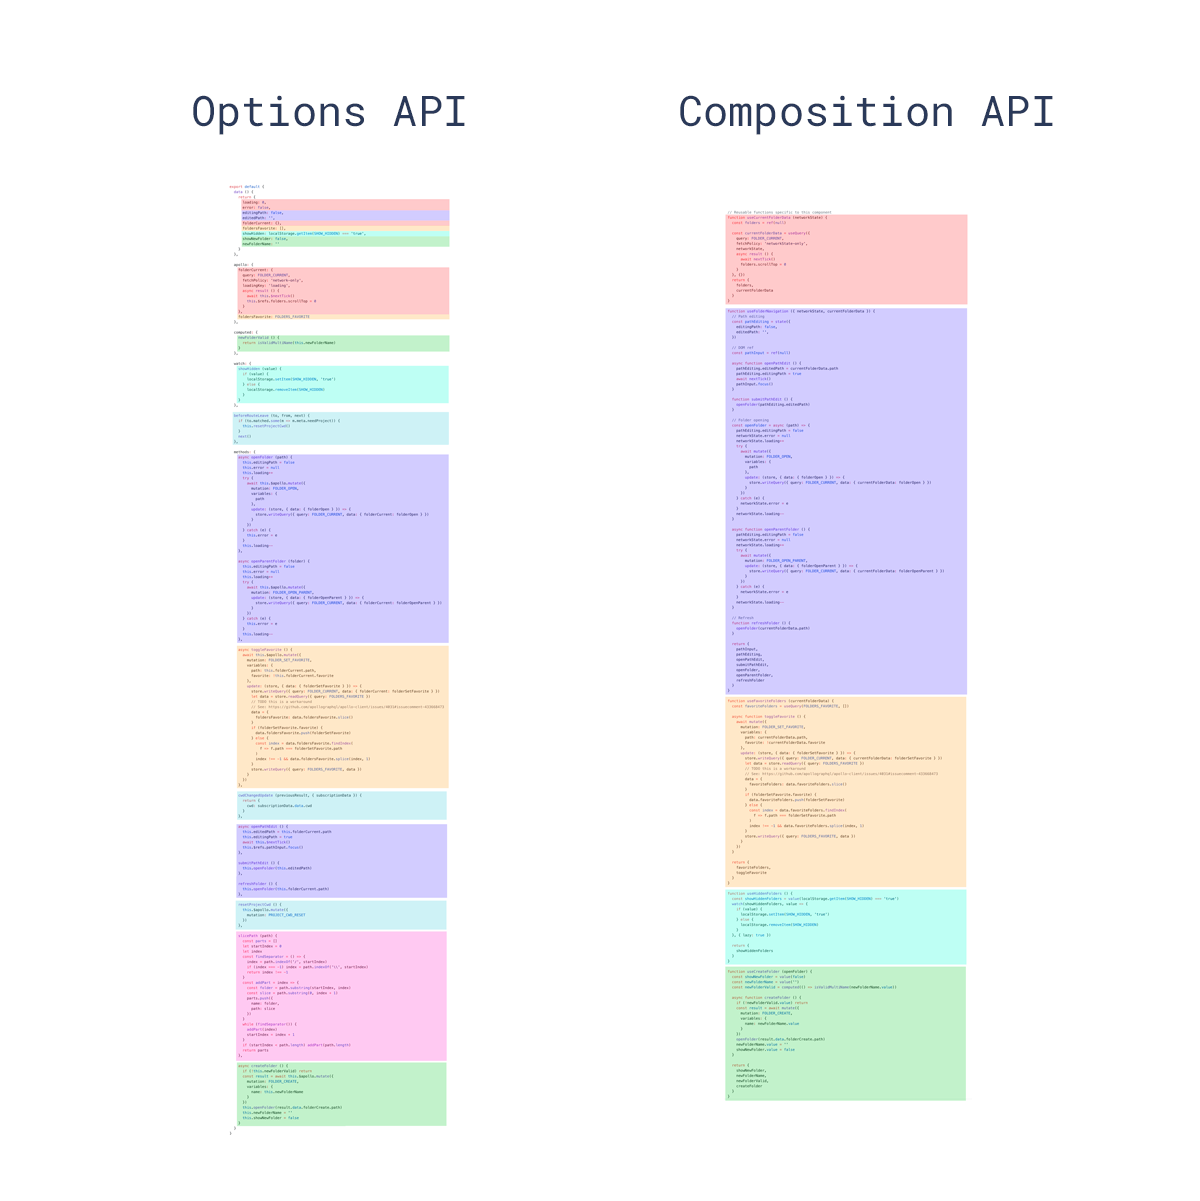 Grouping logic in the Composition API versus the Options API